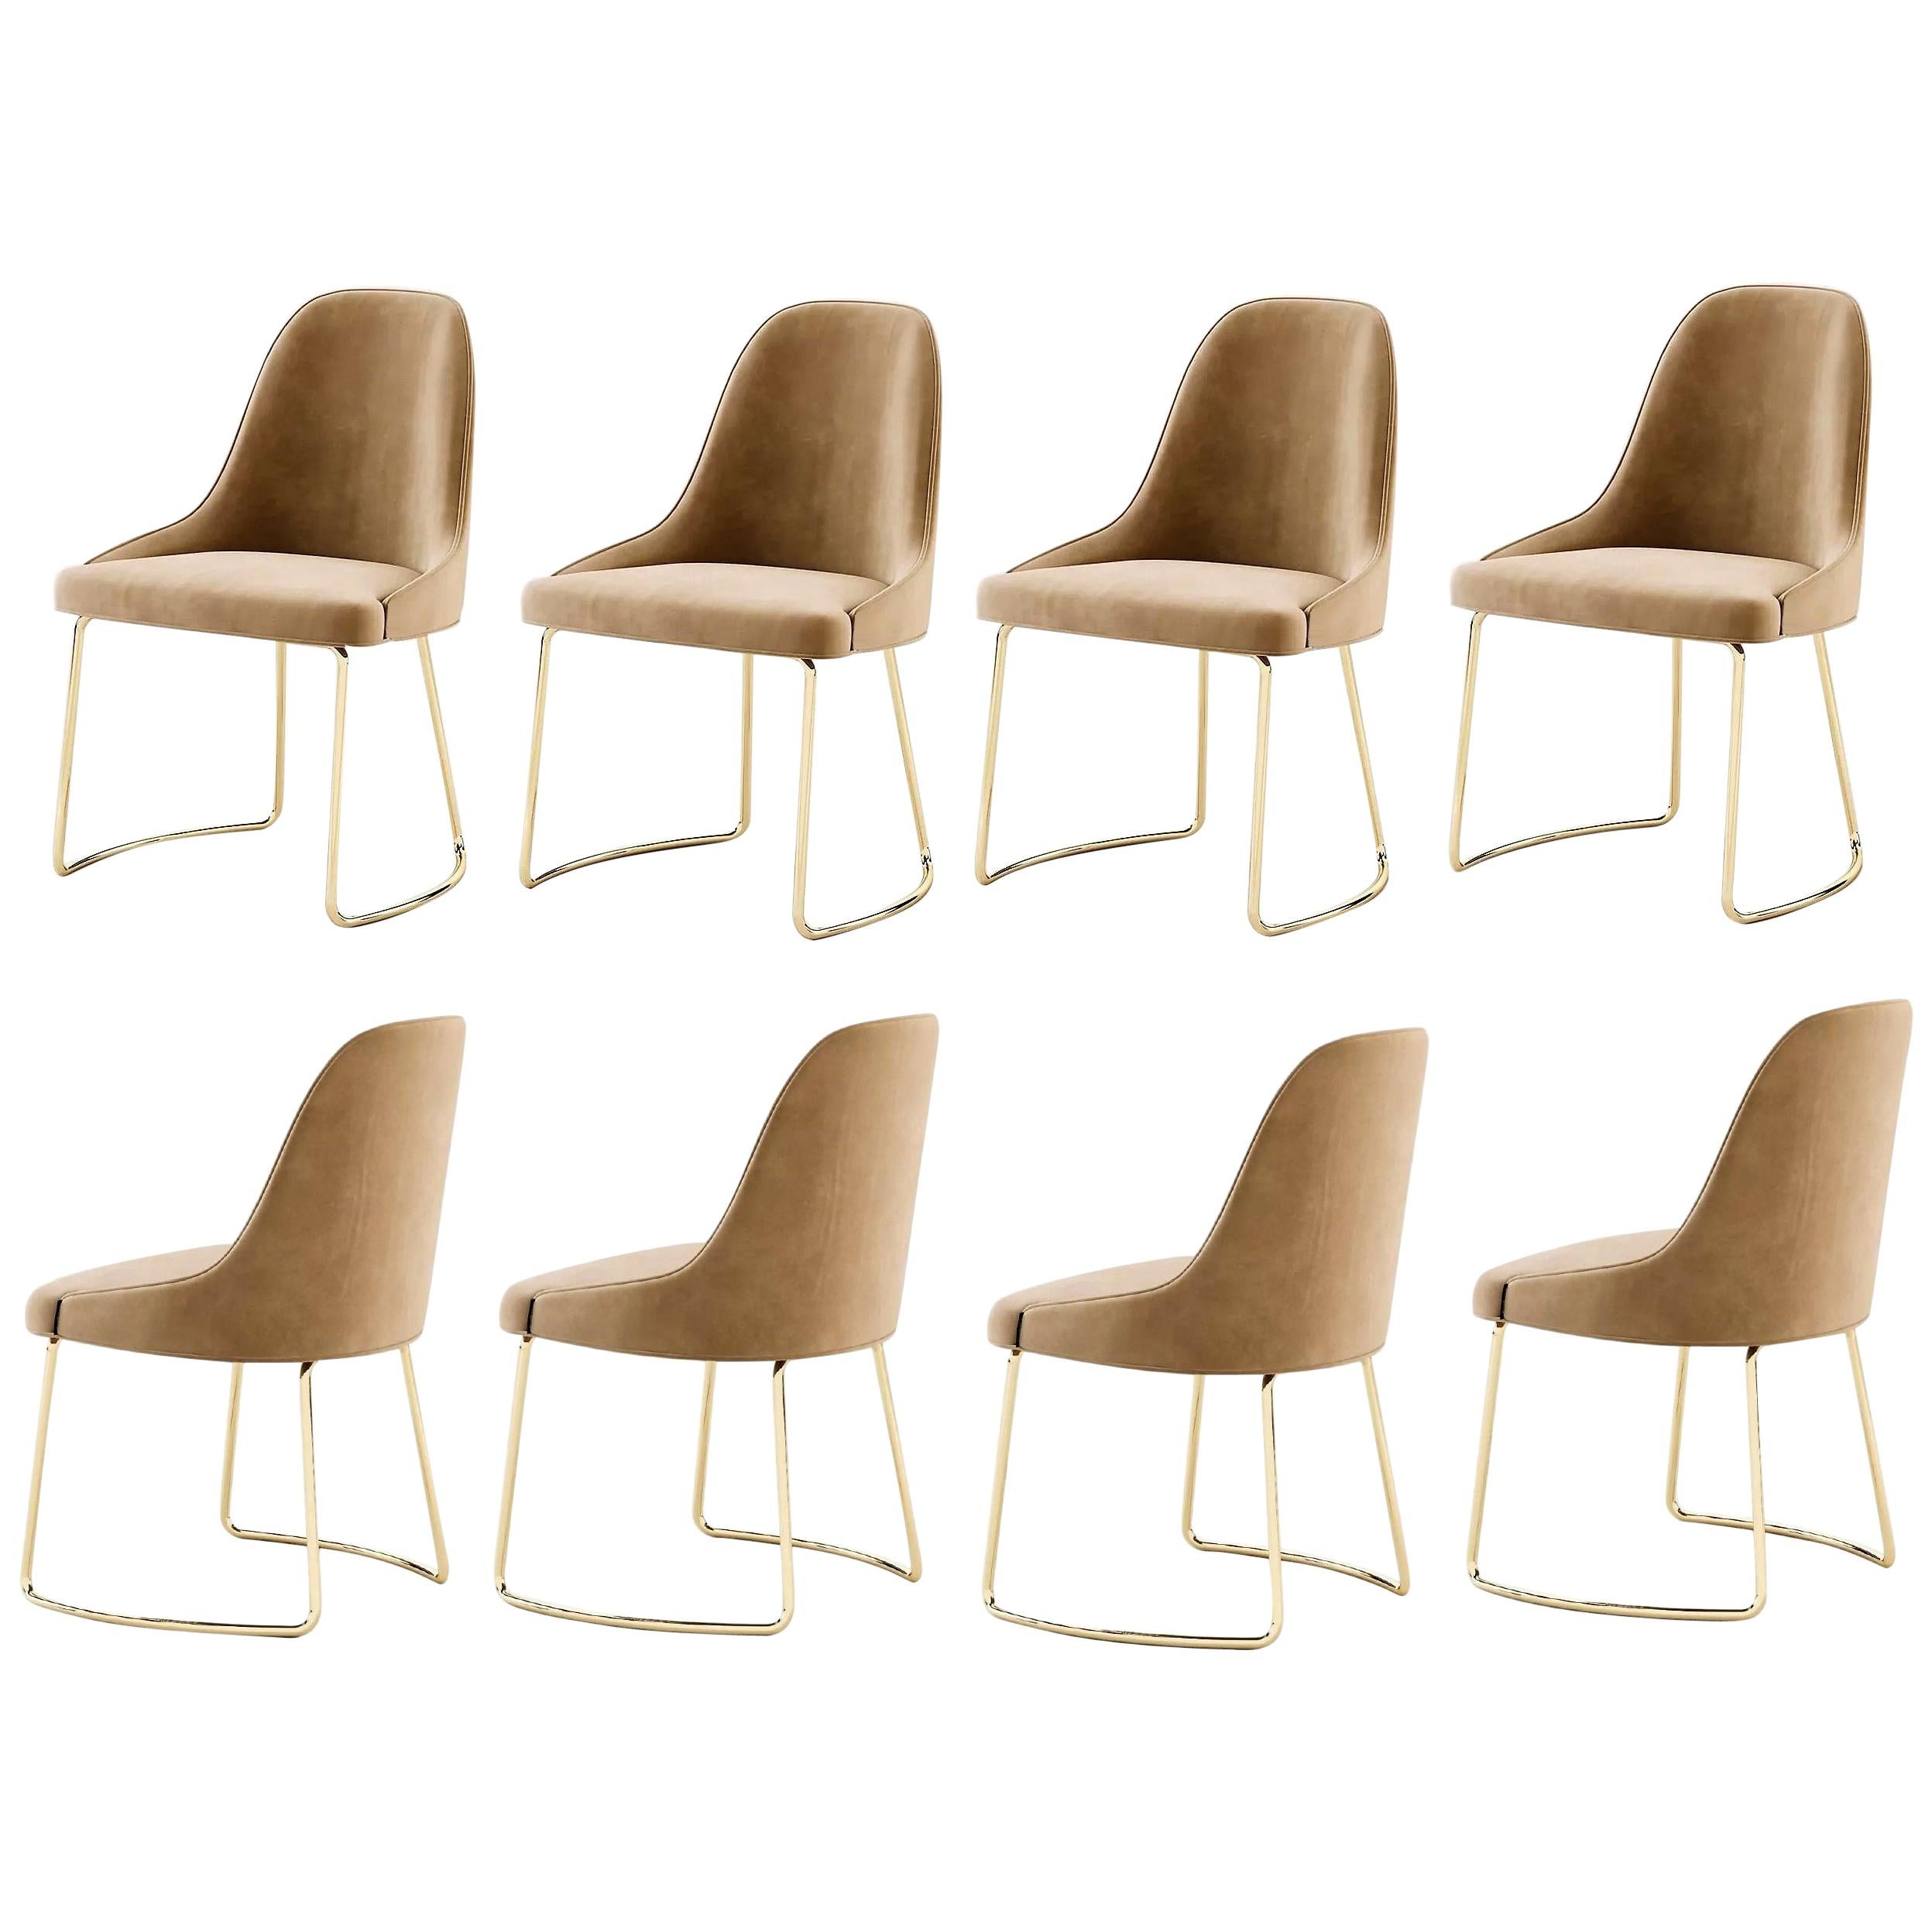 Set of 8 Contemporary Dining Chairs, Champagne/Gold